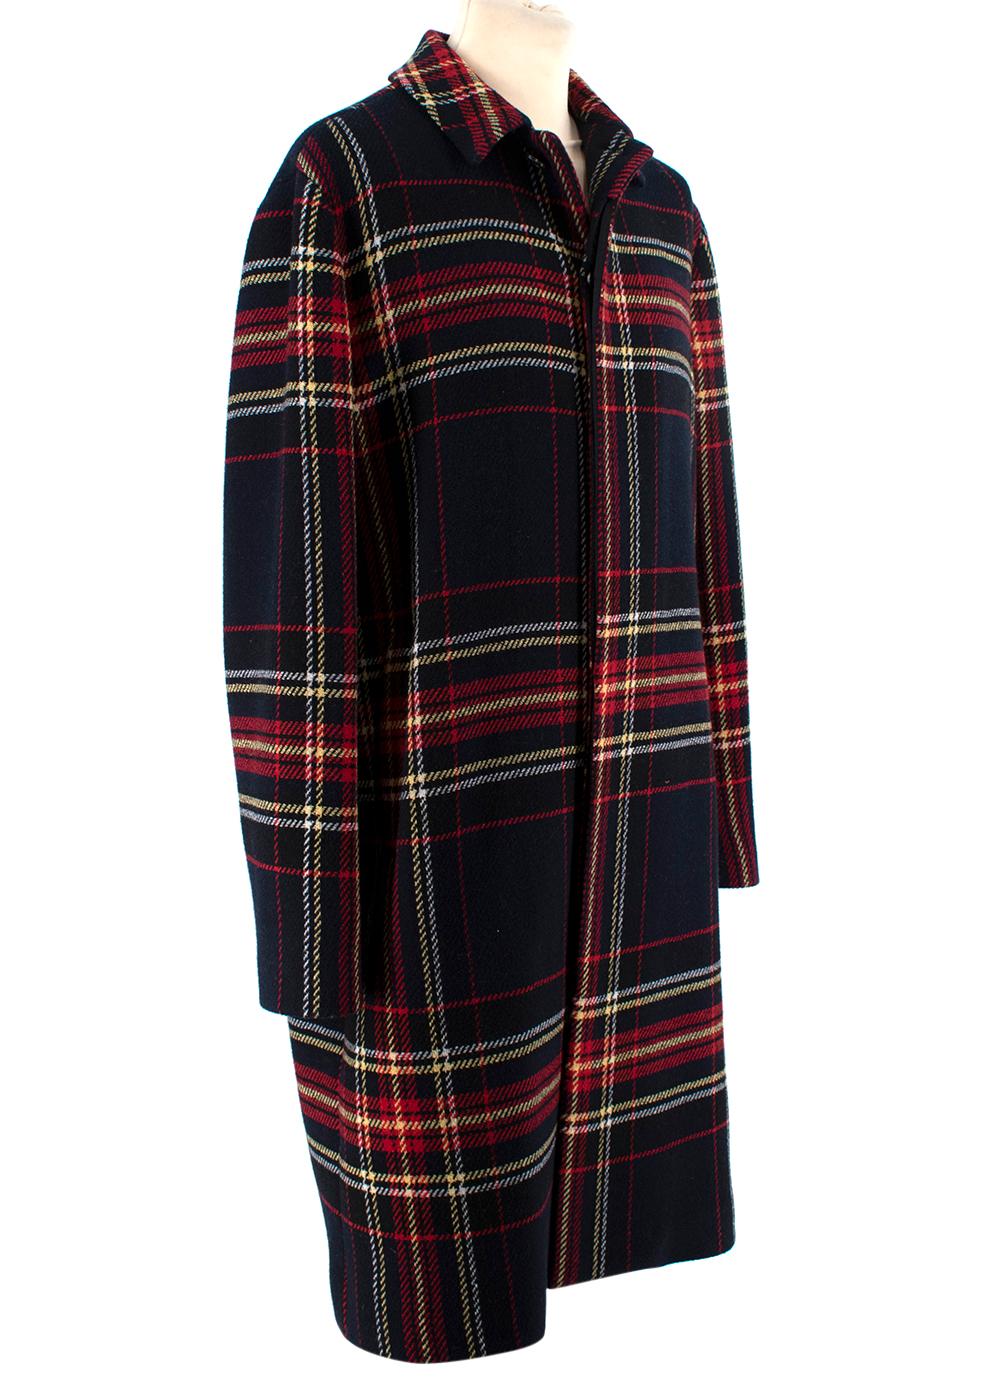 McQ Alexander McQueen Navy & Red Plaid Wool Coat

- Point collar, car-style coat rendered in a chunky red, yellow & navy wool plaid 
- Concealed front button up closure, two welt pockets
- Fully lined, single vented

Materials:
68% Wool
30%